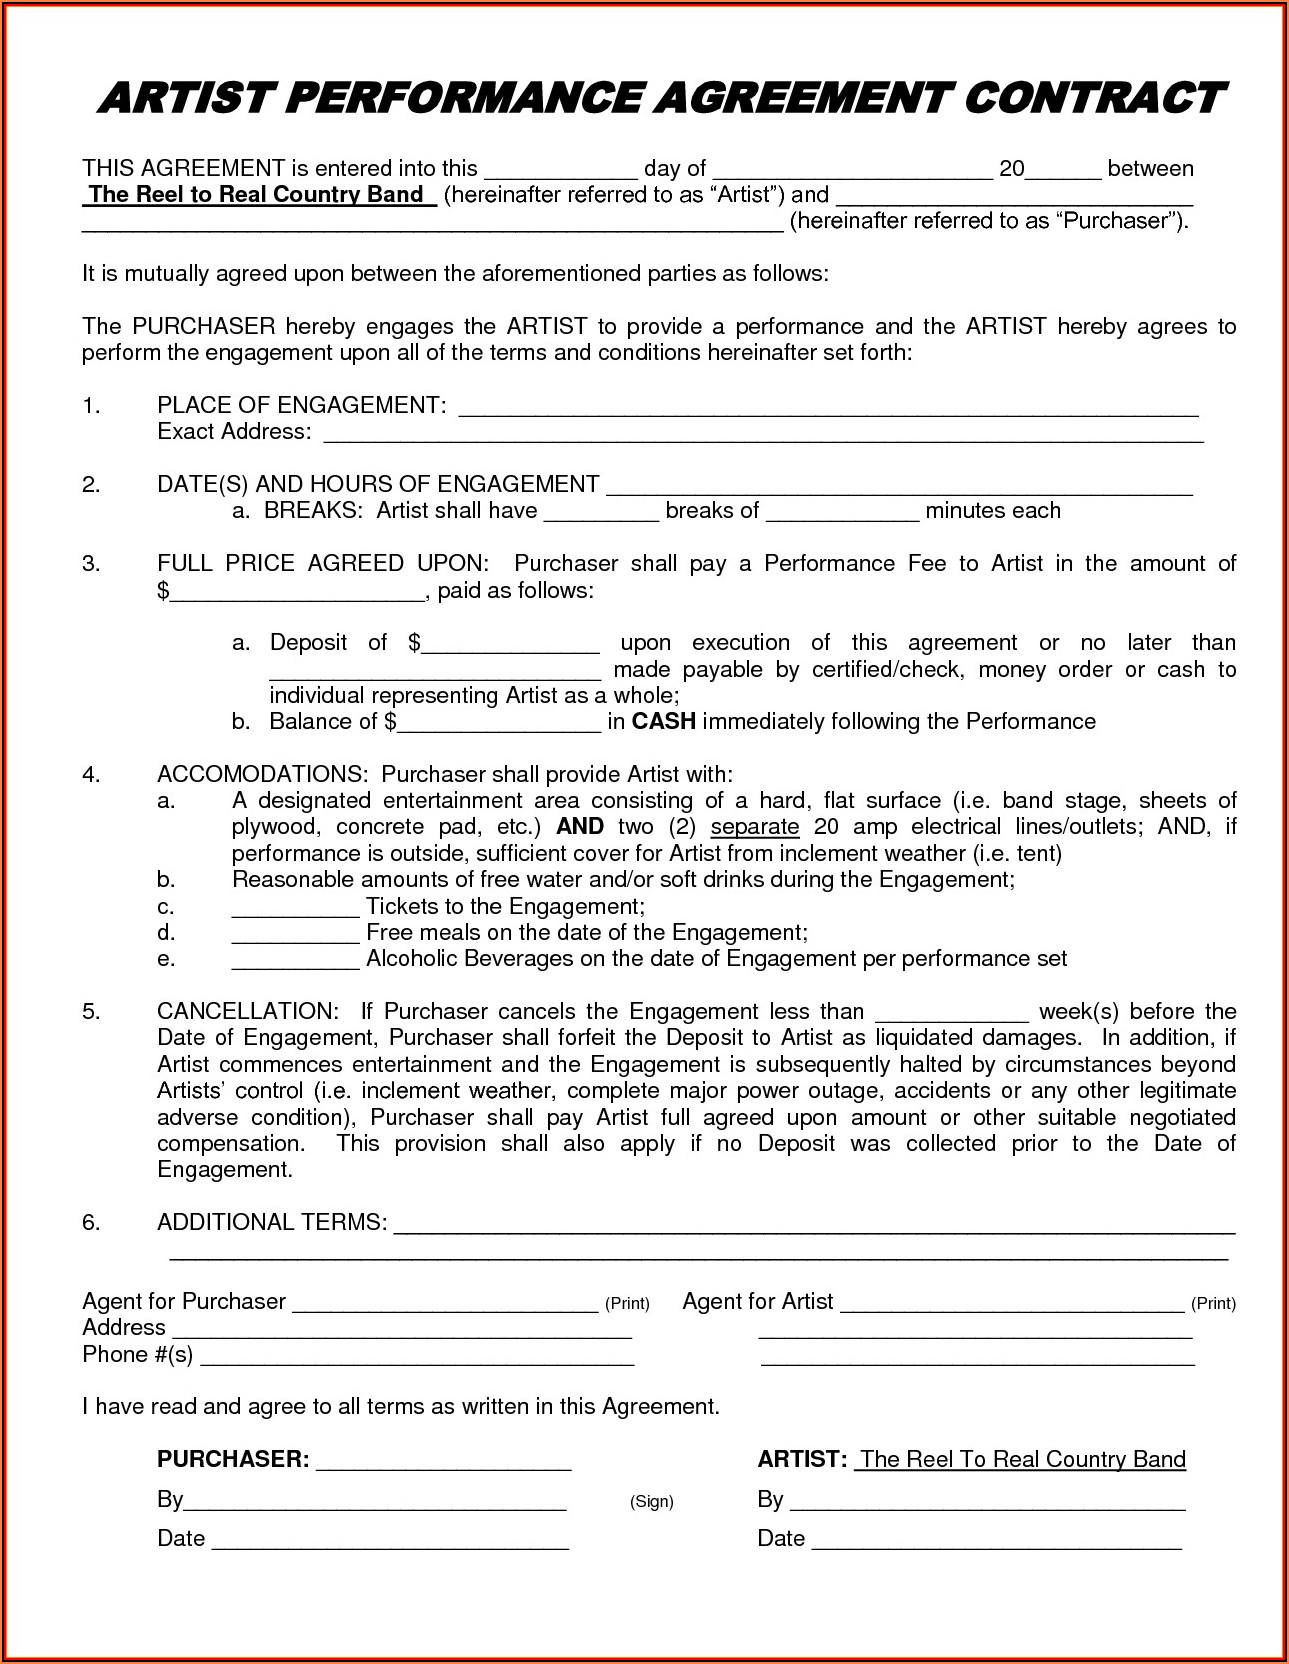 Artist Performance Agreement Contract Template